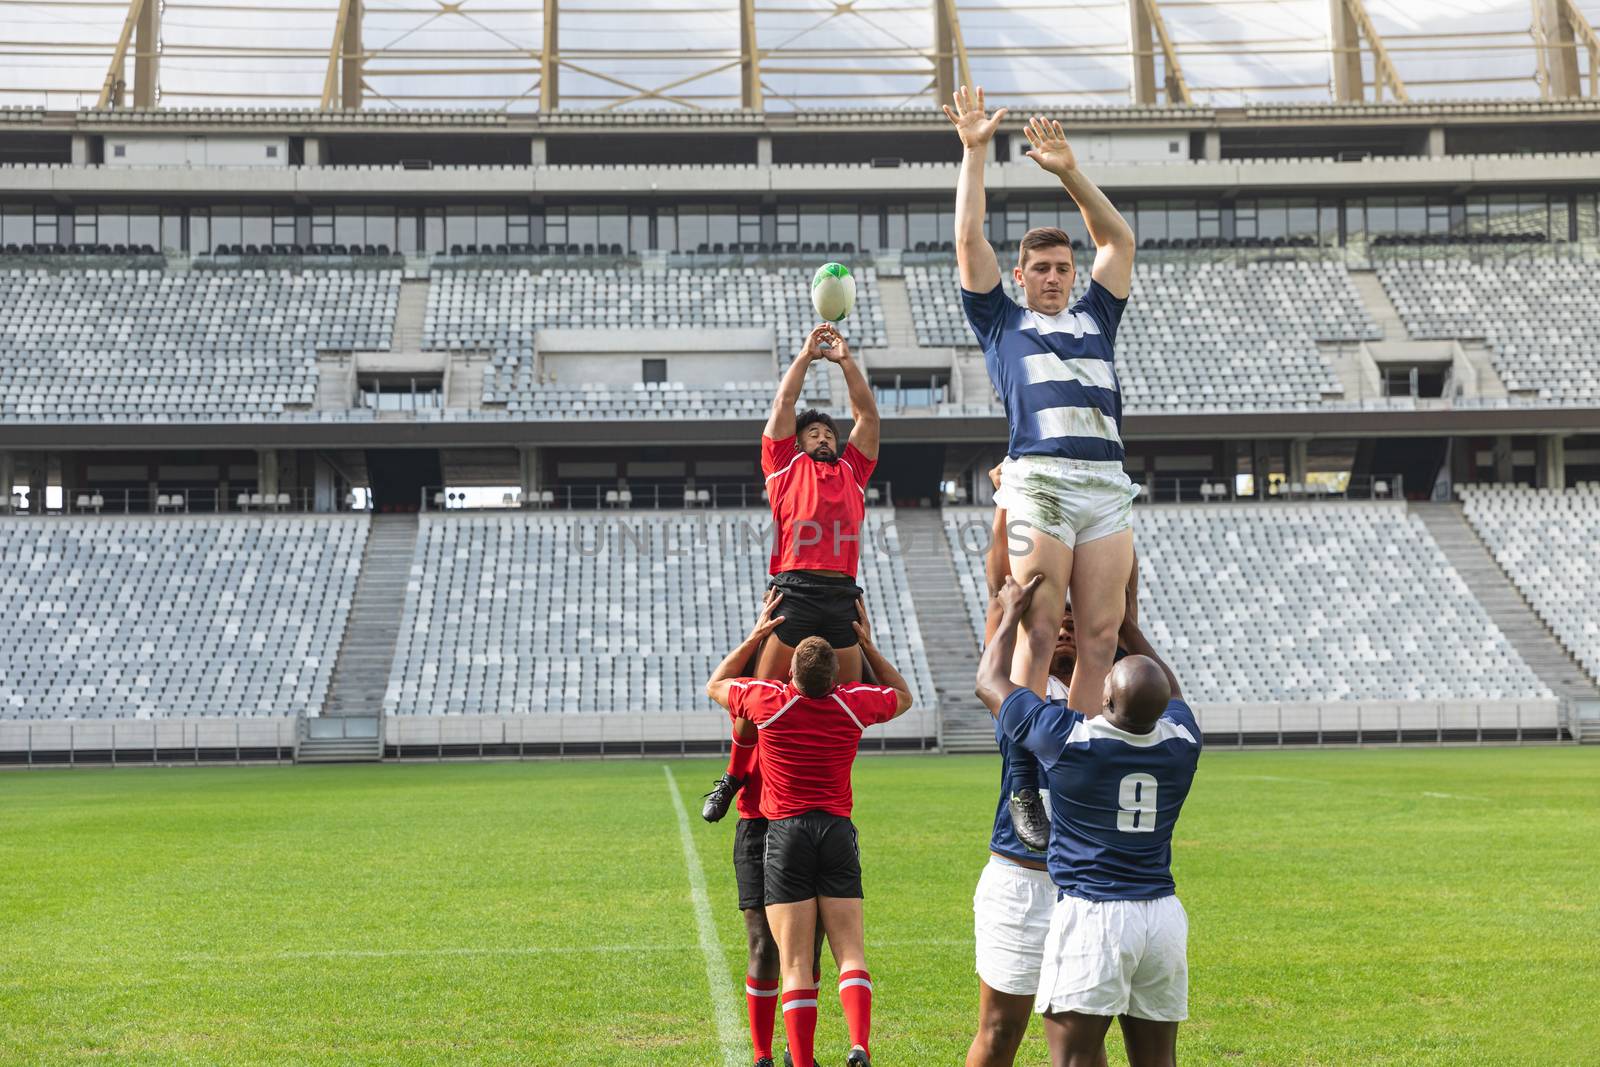 Male rugby players playing rugby match in stadium by Wavebreakmedia